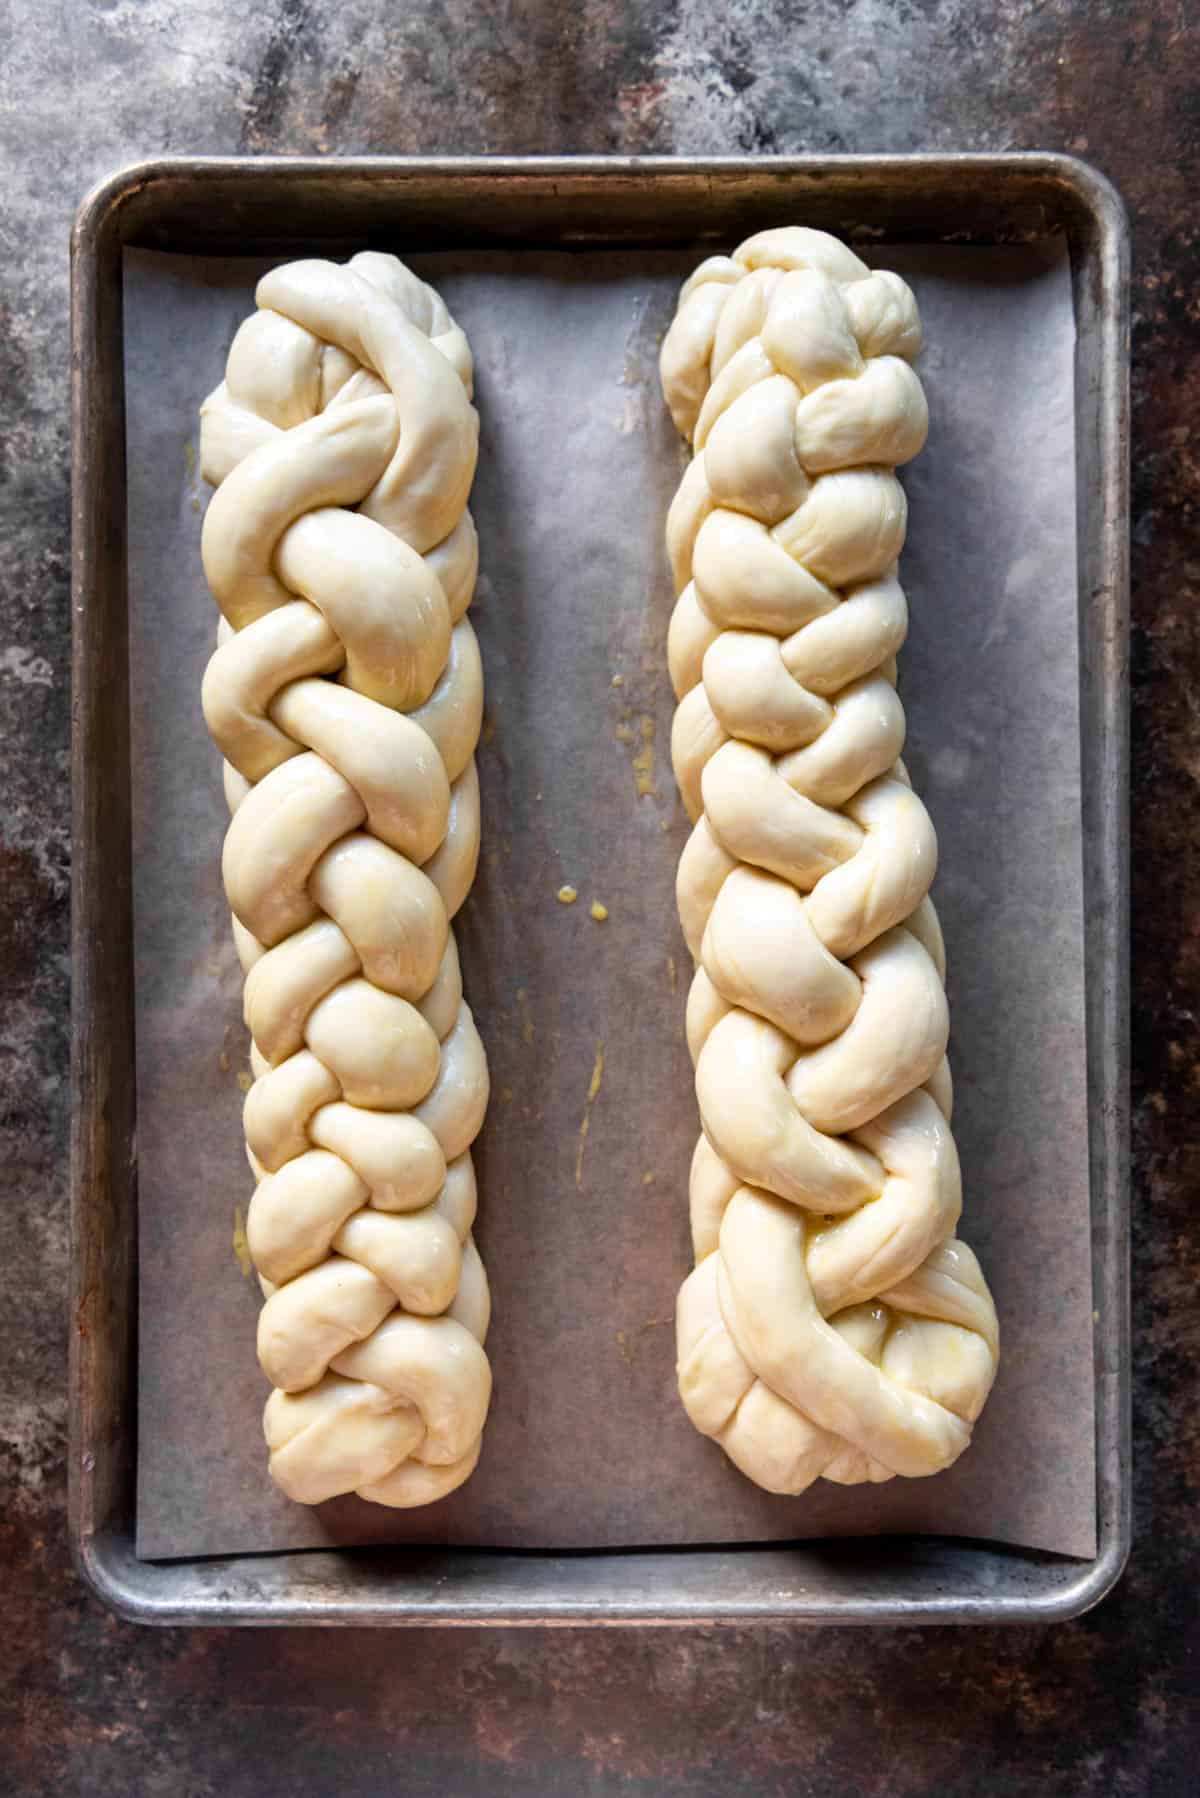 An image of two unbaked loaves of challah bread that have been brushed with egg wash.